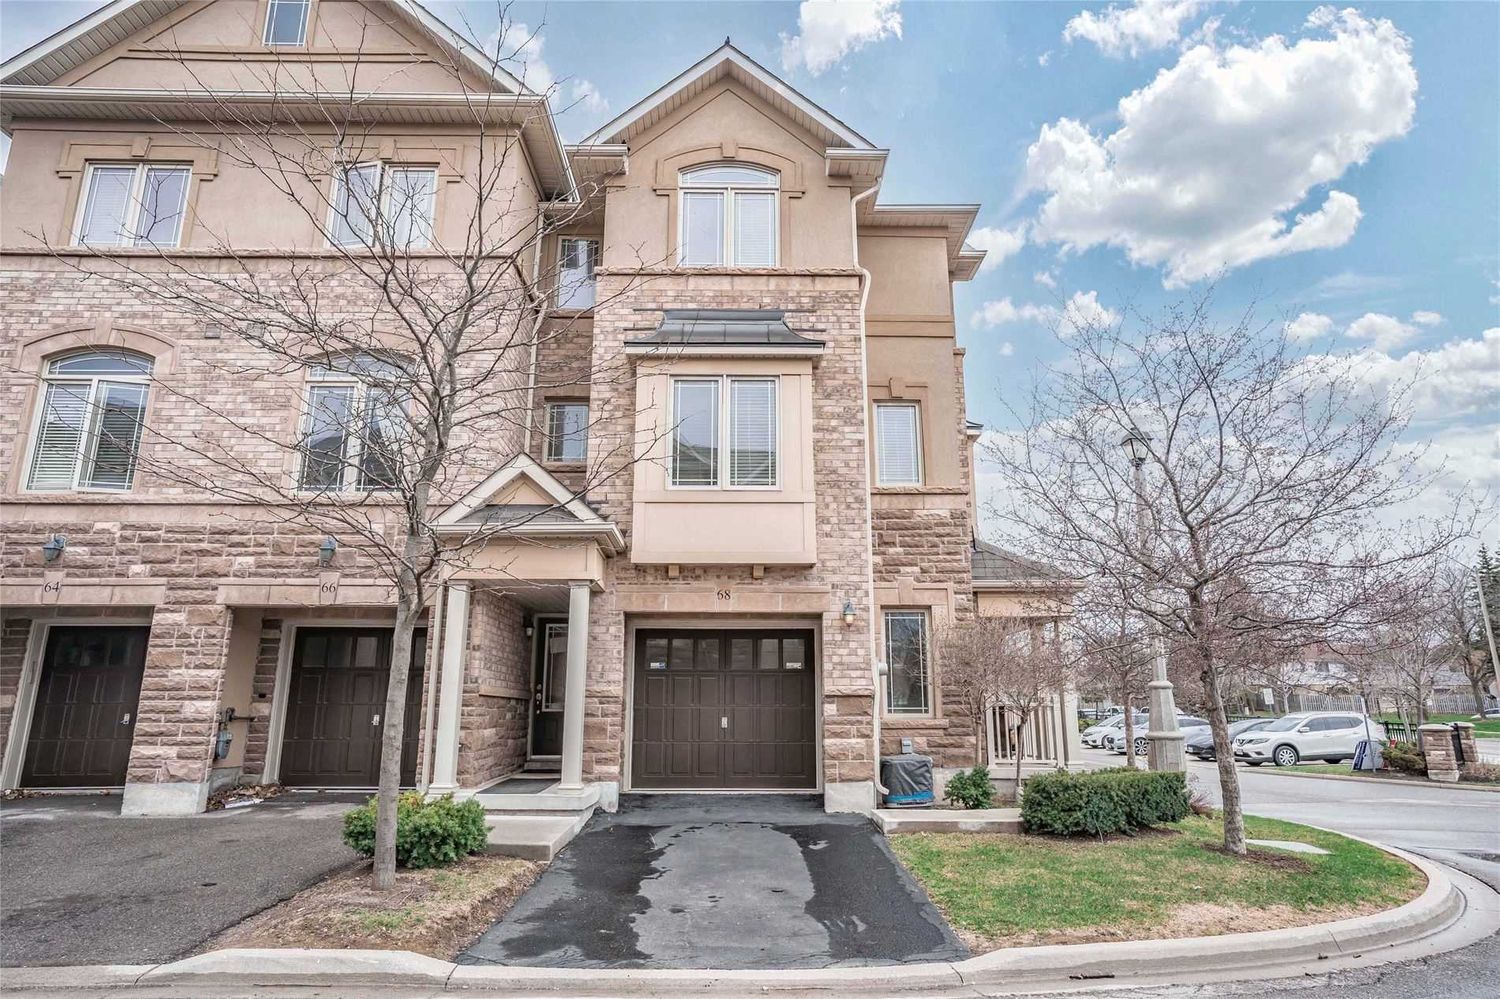 6625 Falconer Drive. 6625 Falconer Drive Townhomes is located in  Mississauga, Toronto - image #2 of 2